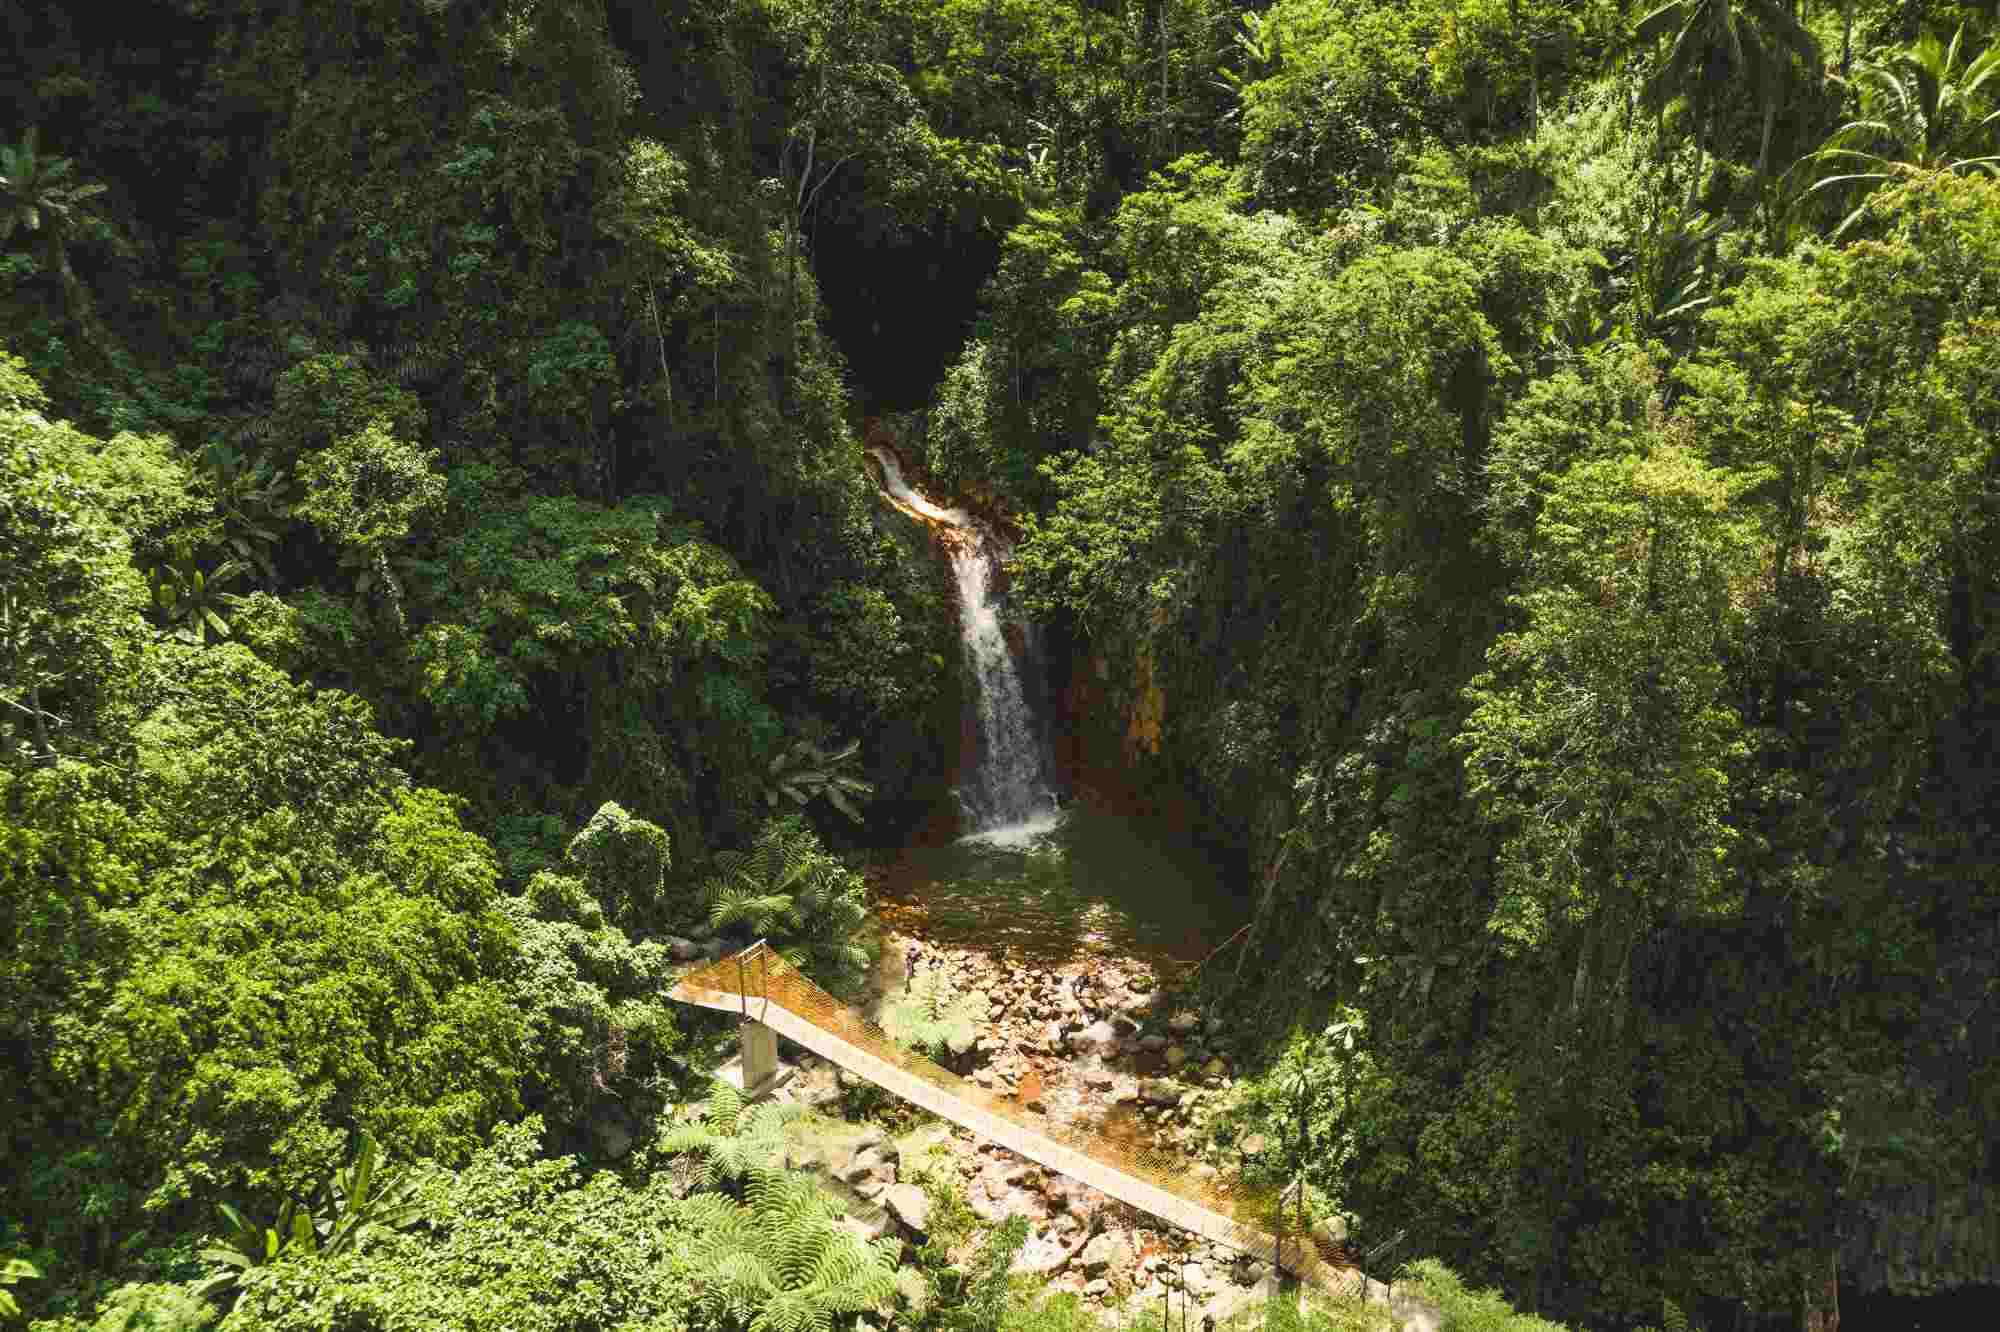 Red rock water fall or Pulangbato Falls in Valencia surrounded by lush green nature and a bridge